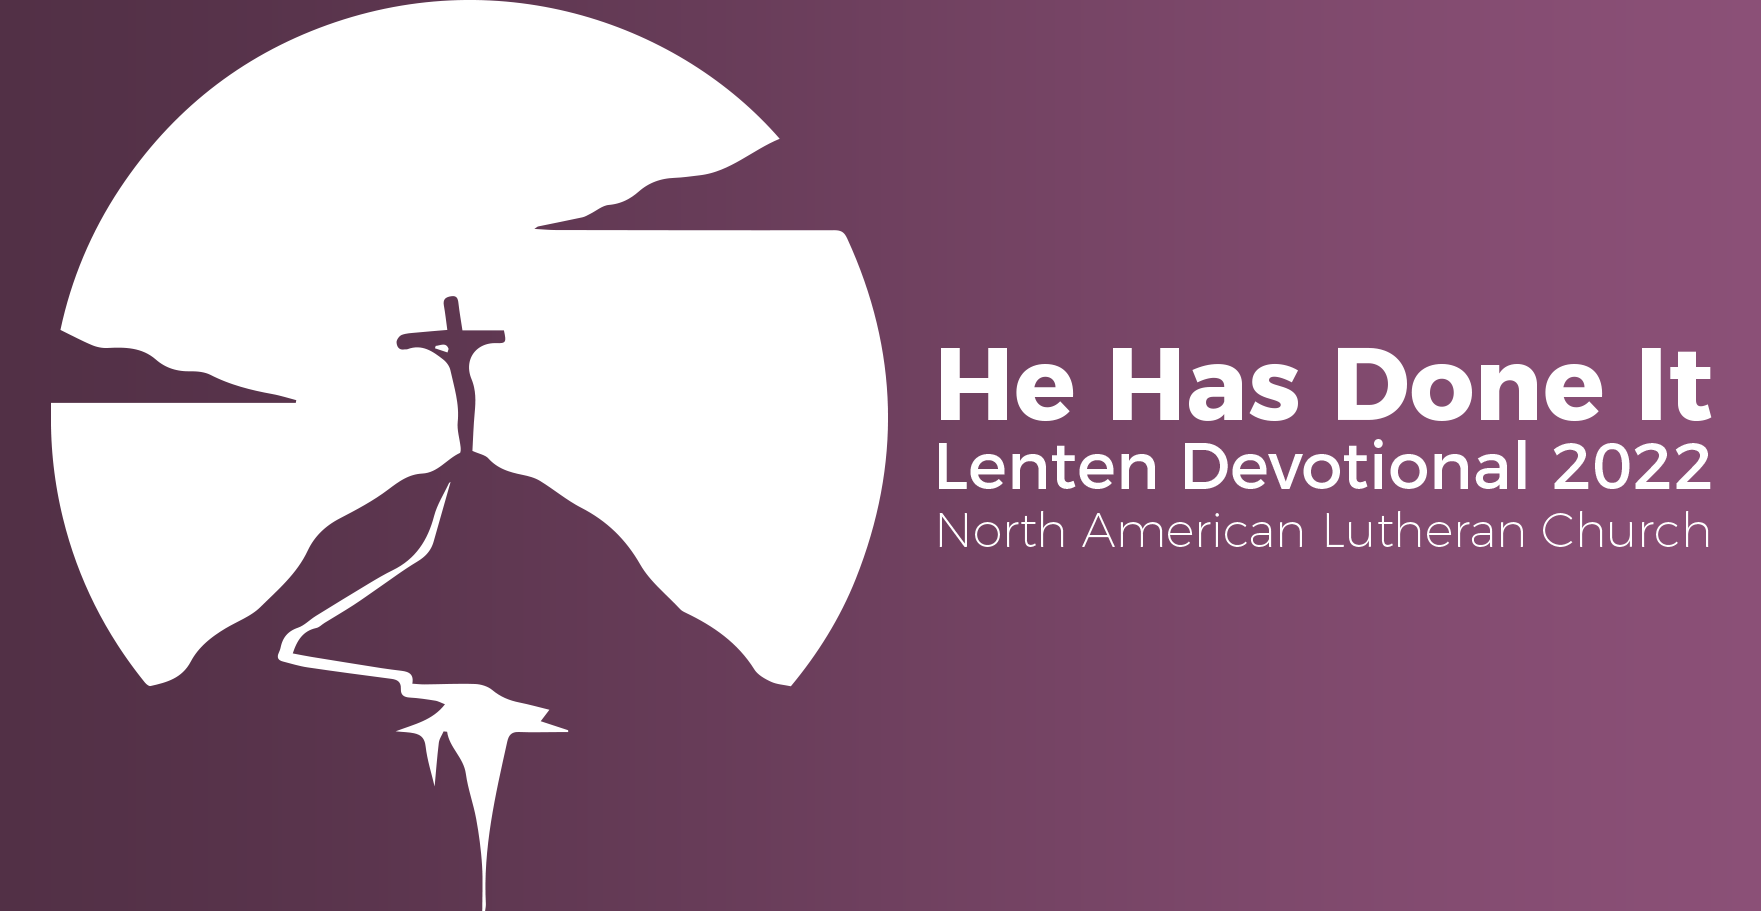 March 25, 2022 | Friday of the Week of Lent III